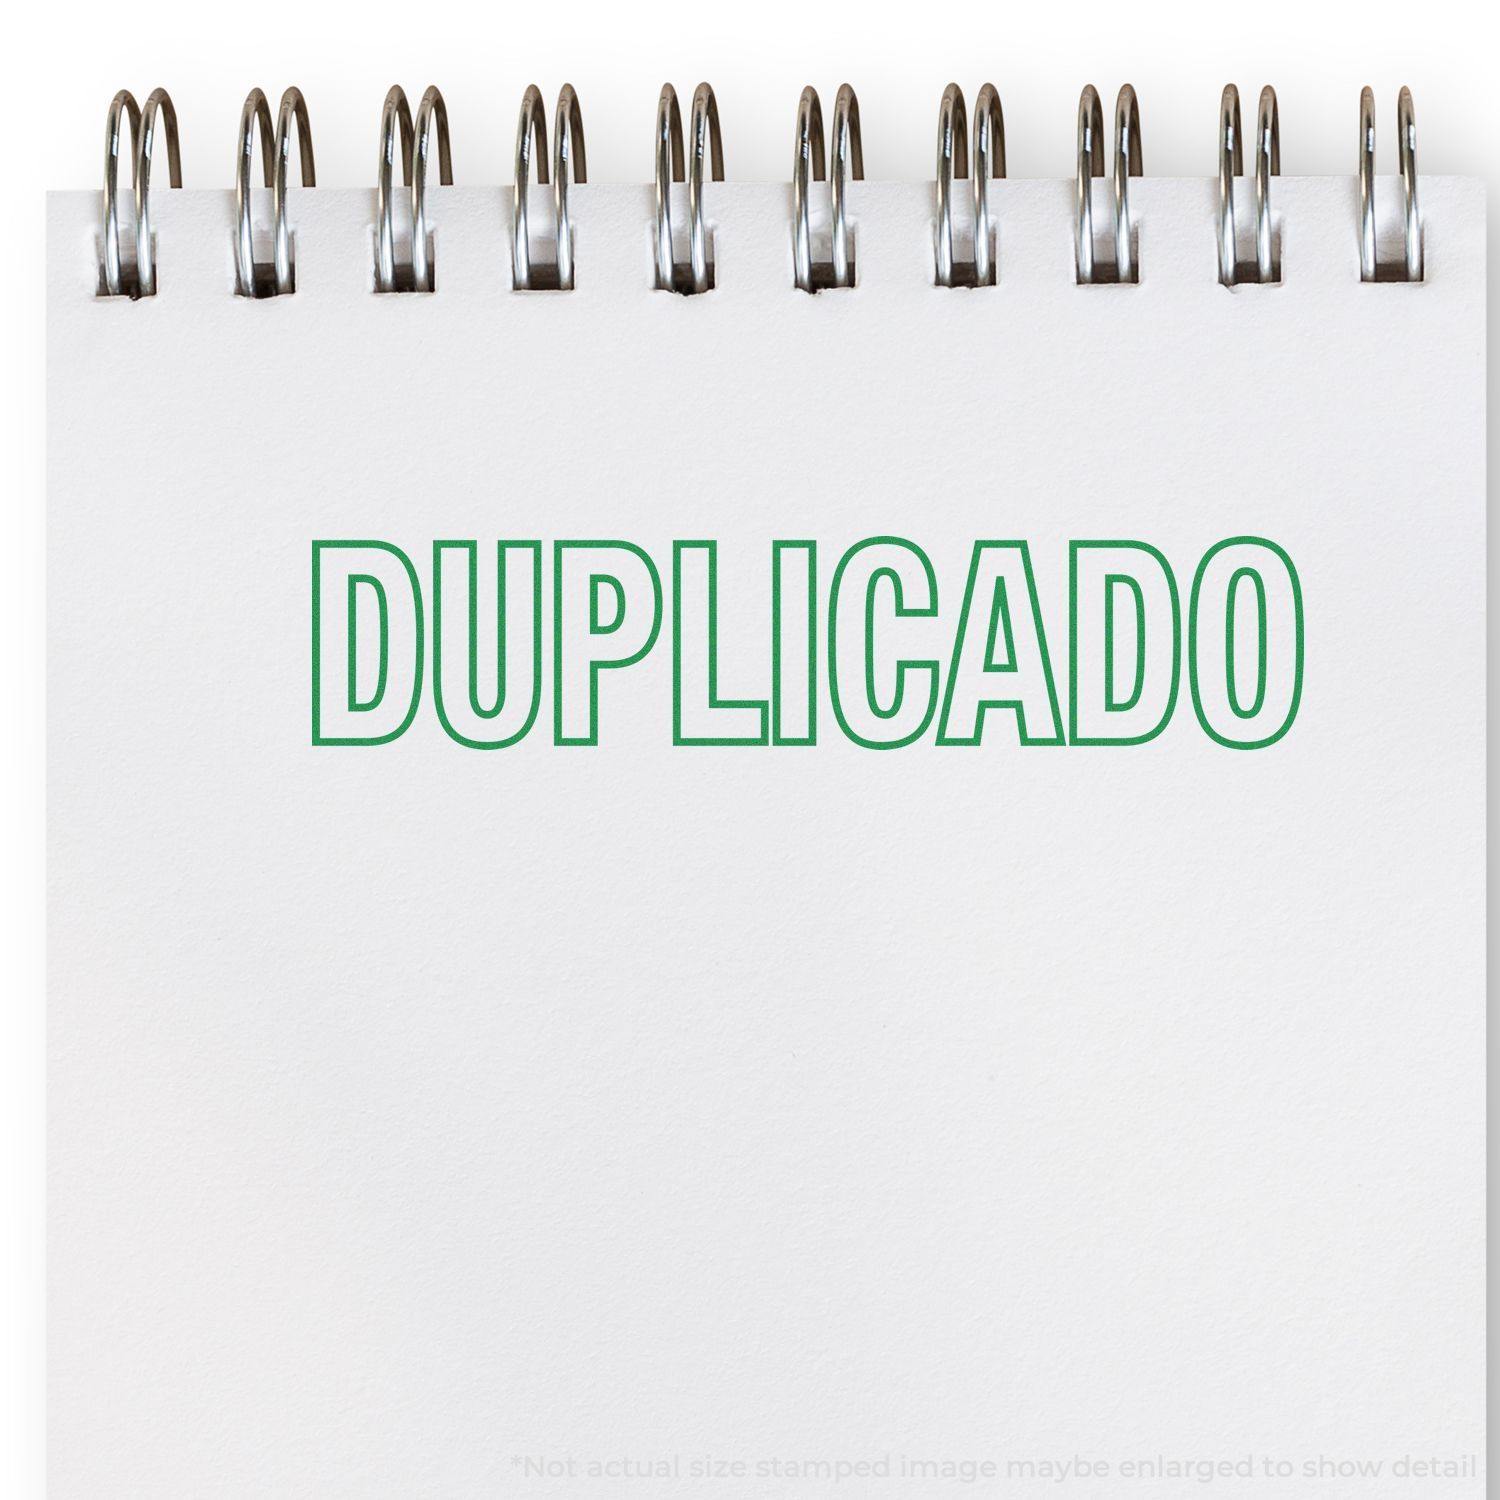 A stock office pre-inked stamp with a stamped image showing how the text "DUPLICADO" in an outline font is displayed after stamping.